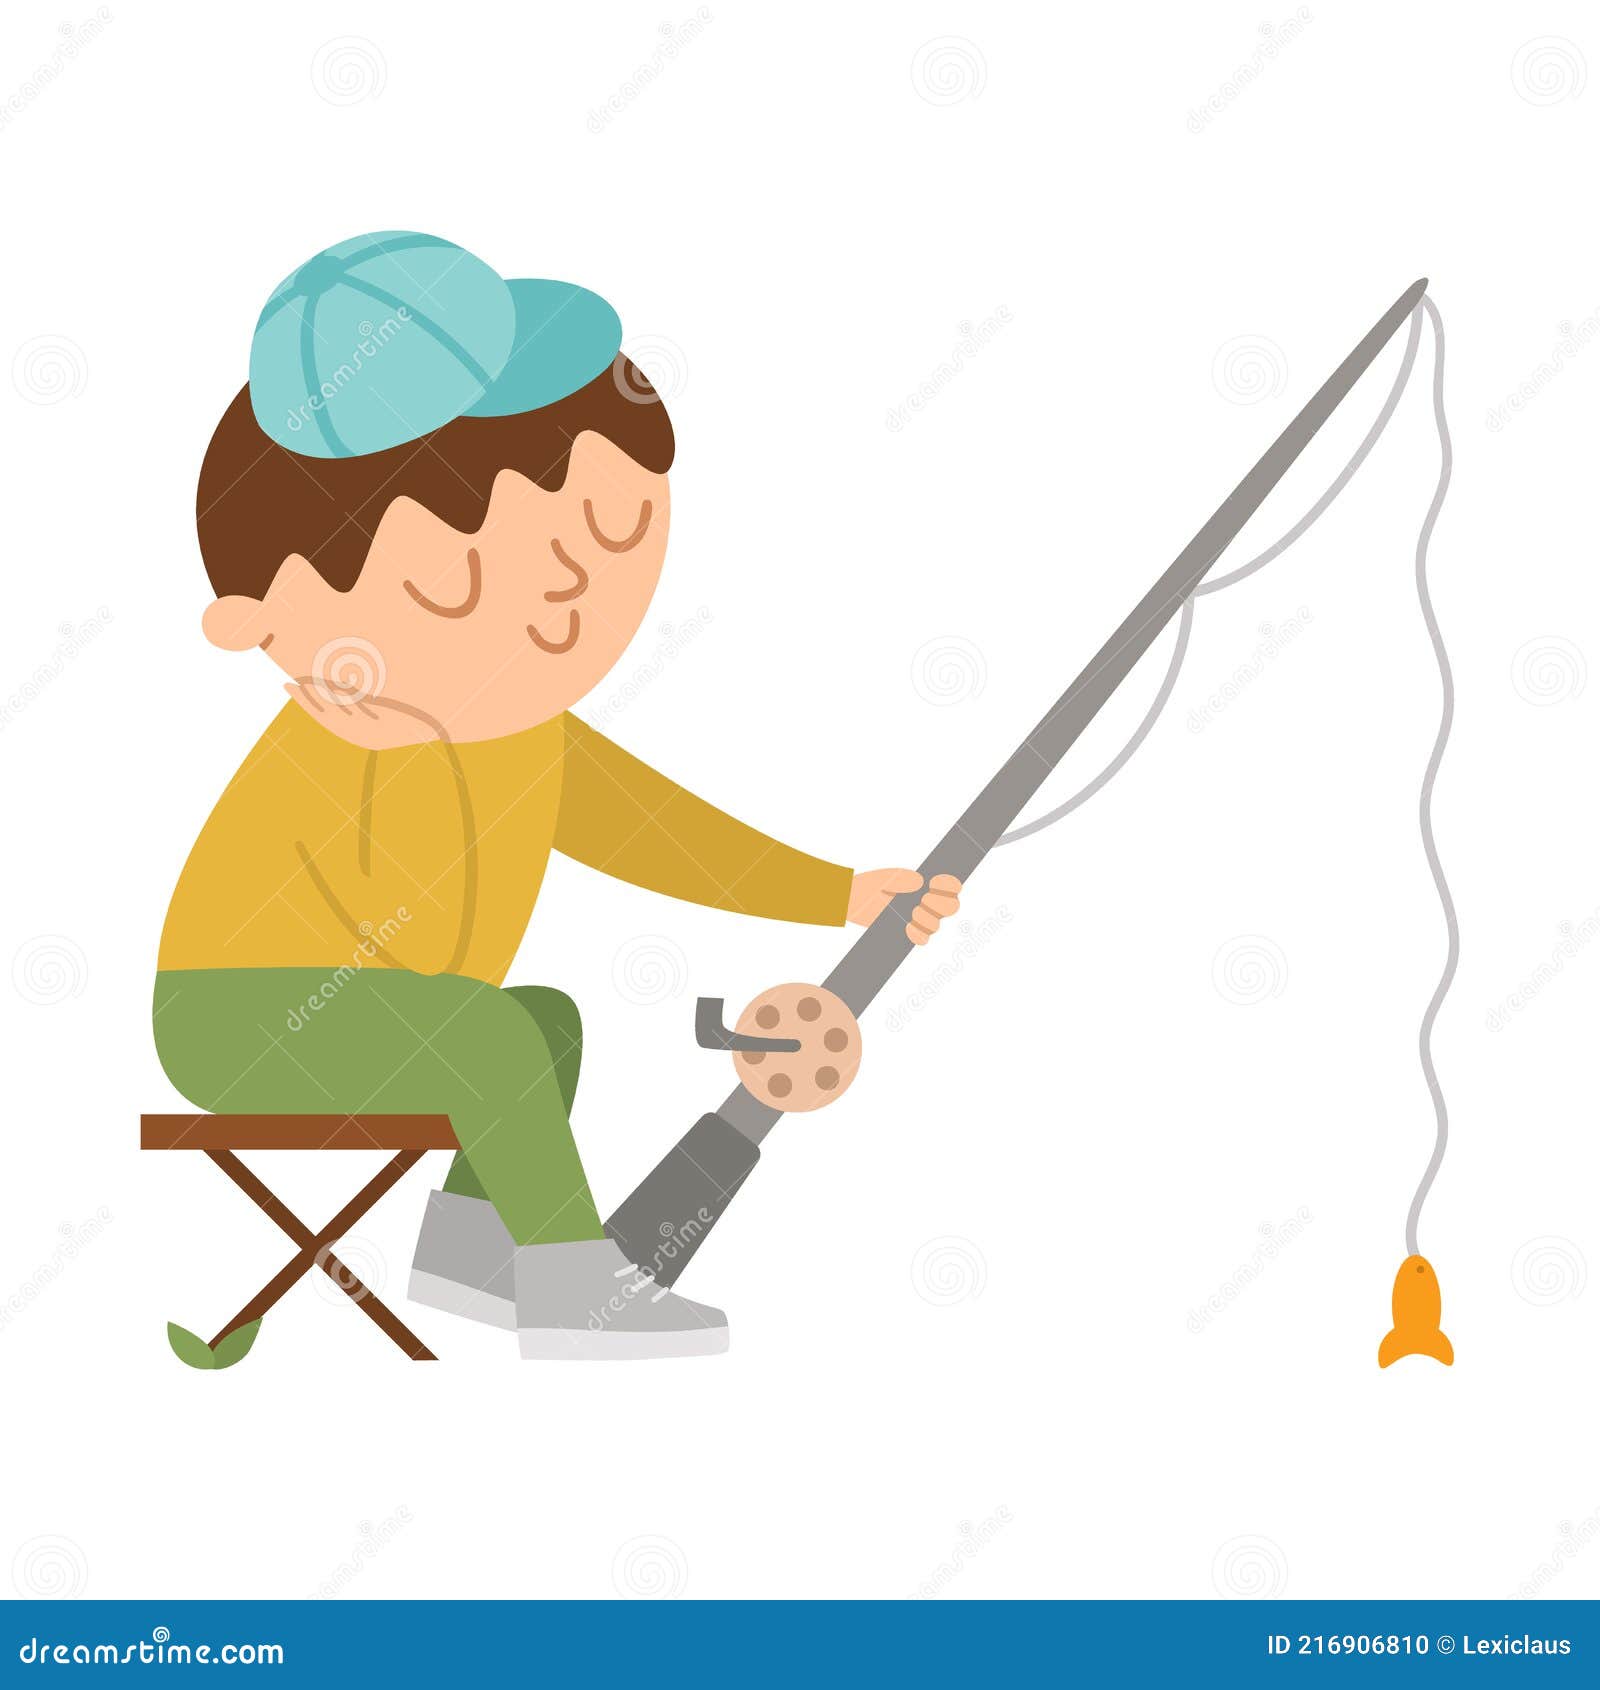 https://thumbs.dreamstime.com/z/vector-cute-boy-sitting-folding-chair-fishing-campfire-activity-scene-kid-rod-traveler-isolated-white-background-216906810.jpg